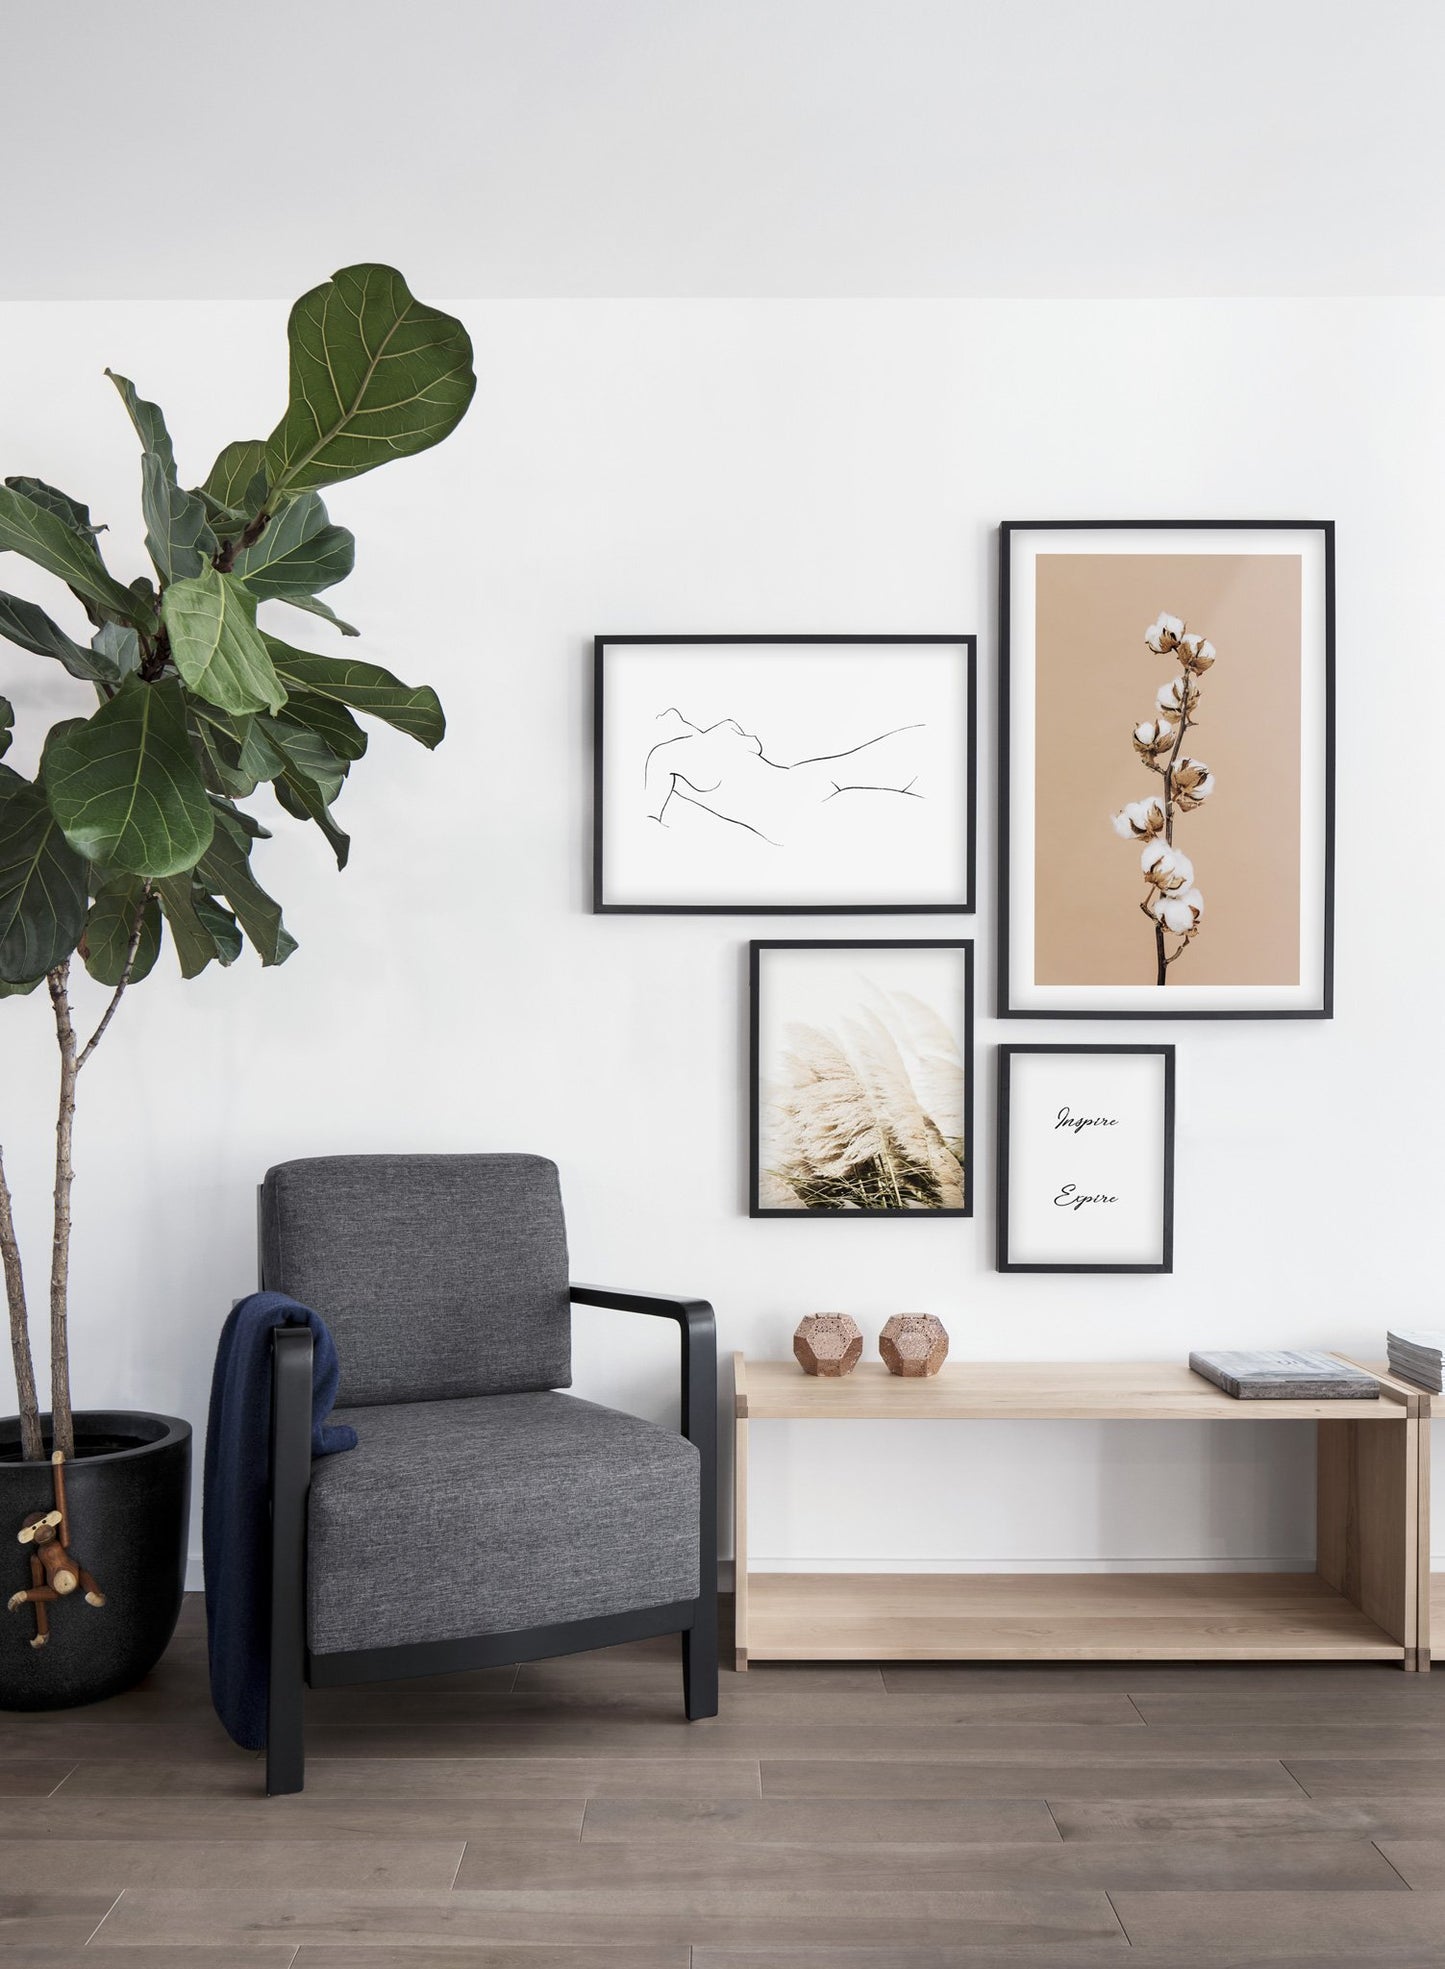 Minimalist poster quad featuring Climbing Cotton cotton plant floral photography - Living Room